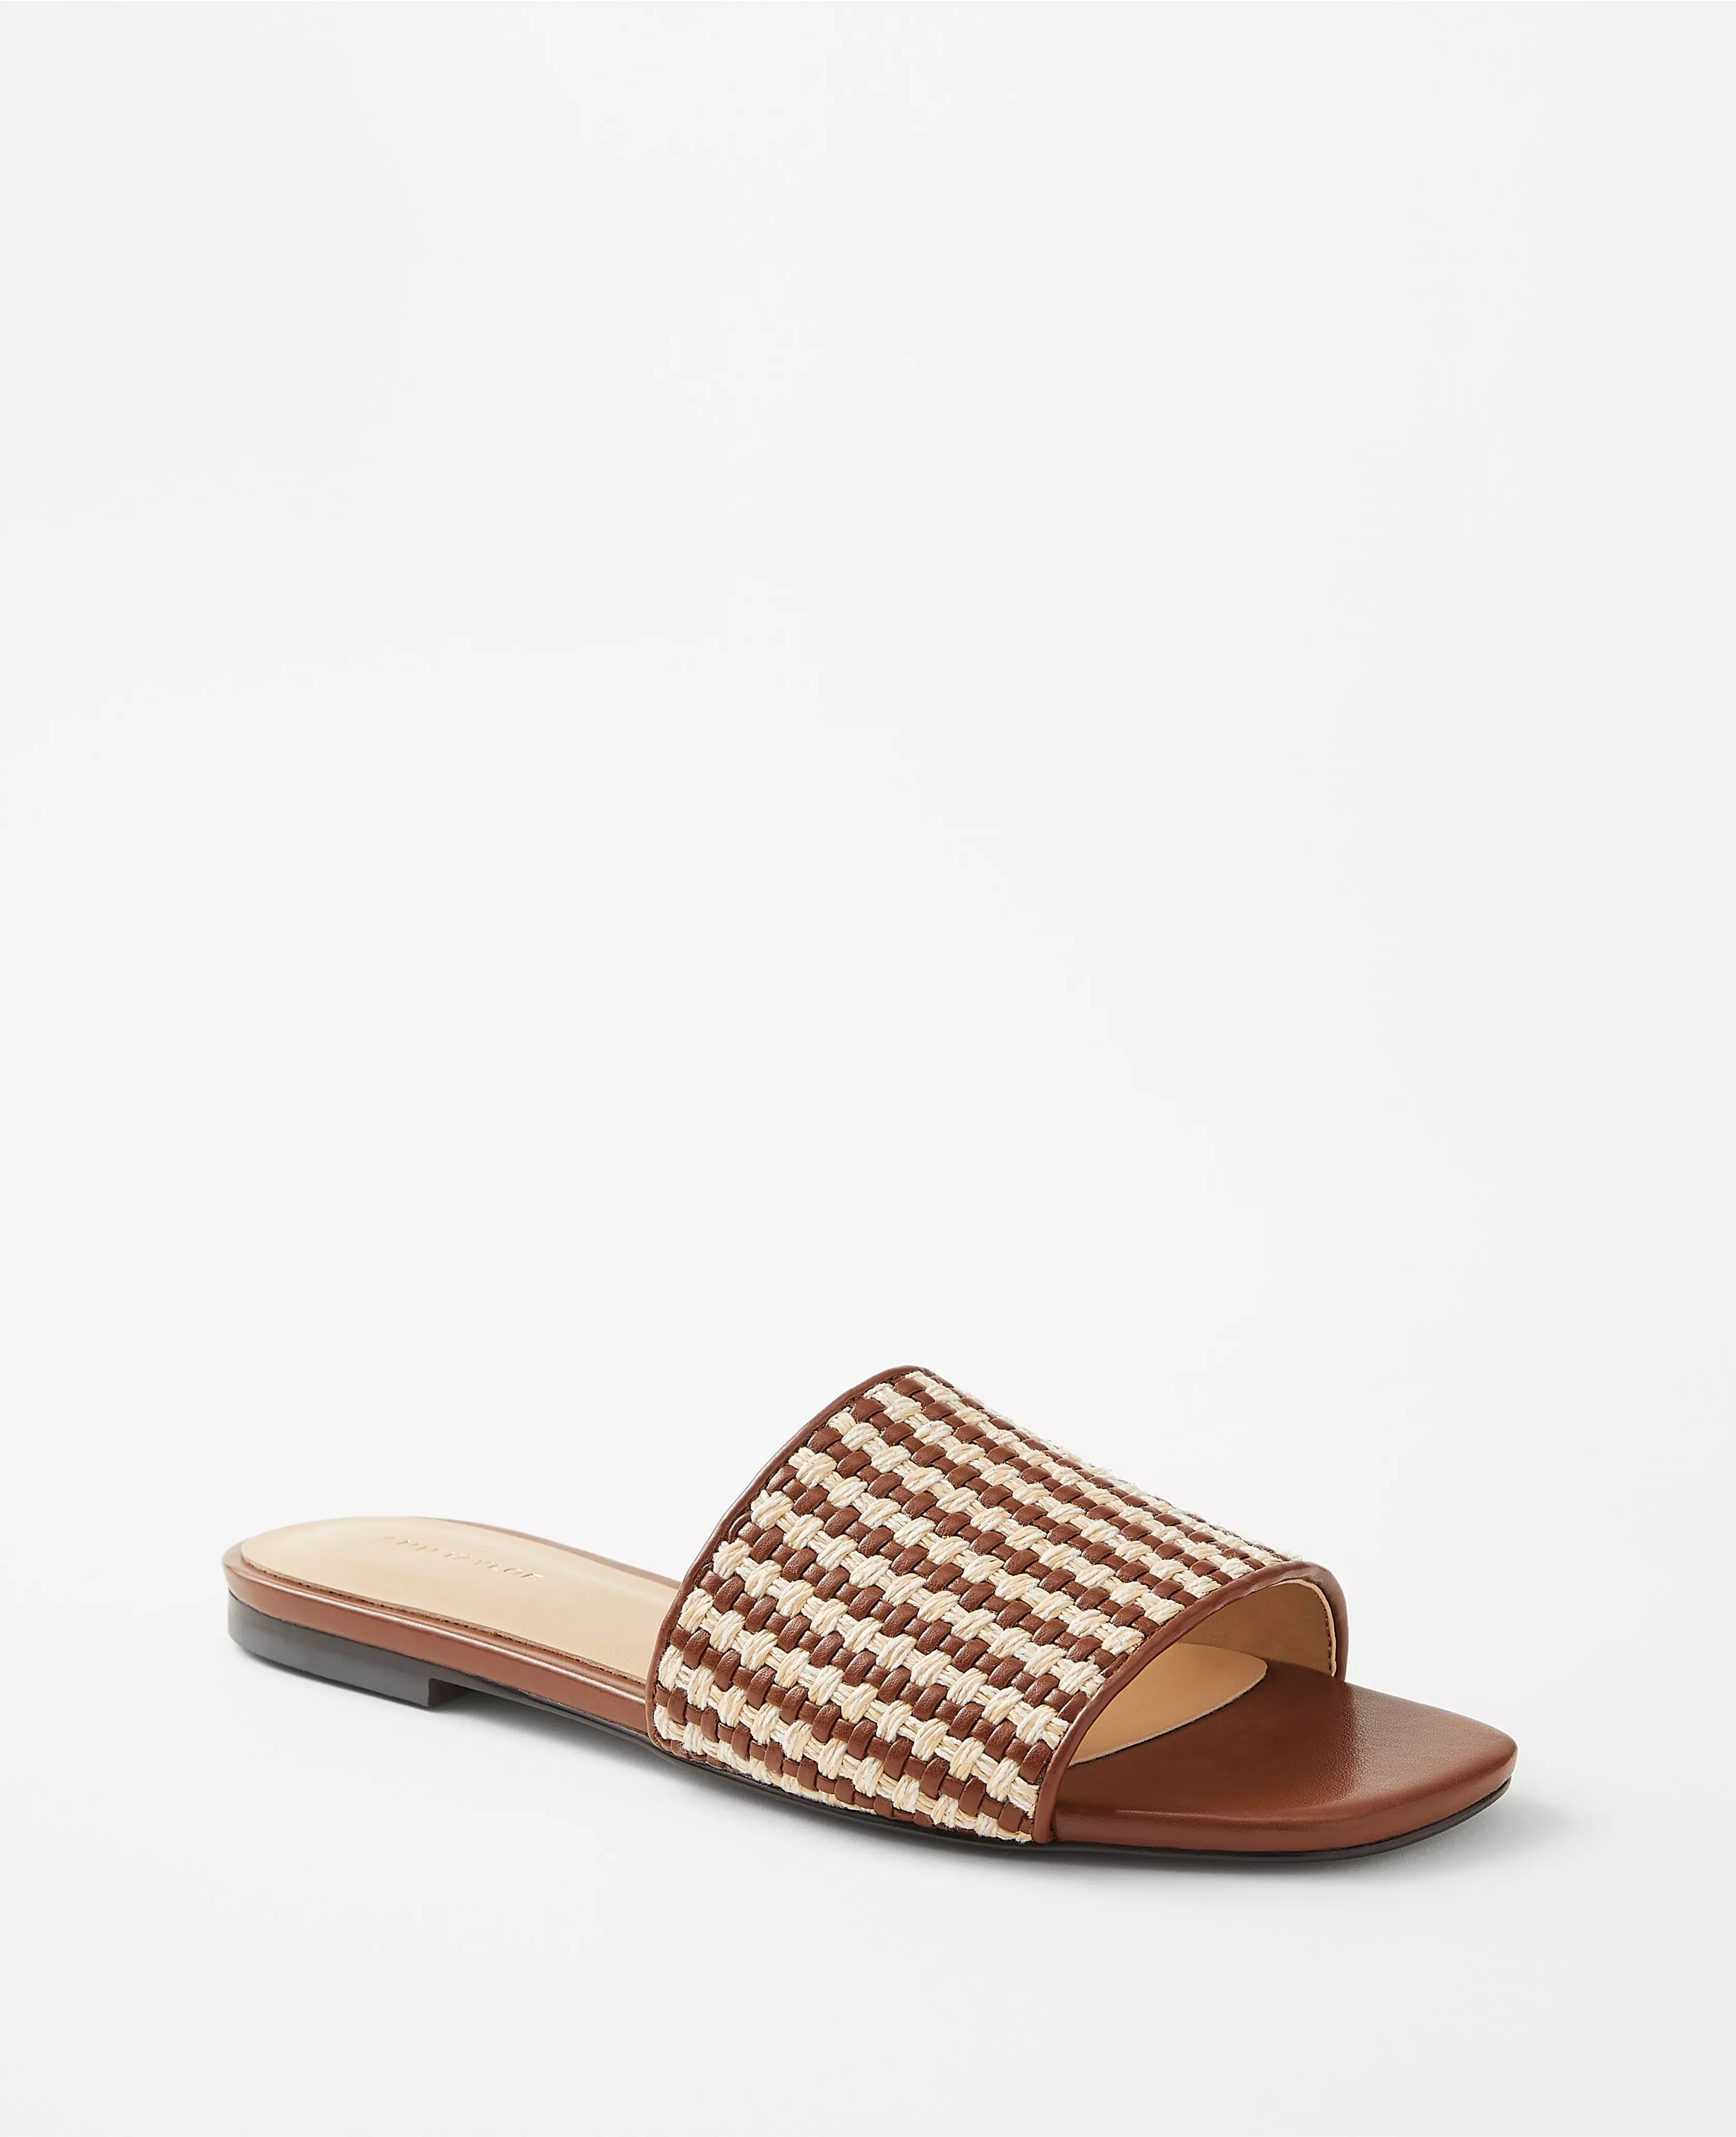 AT Weekend Woven Leather Flat Sandals | Ann Taylor (US)